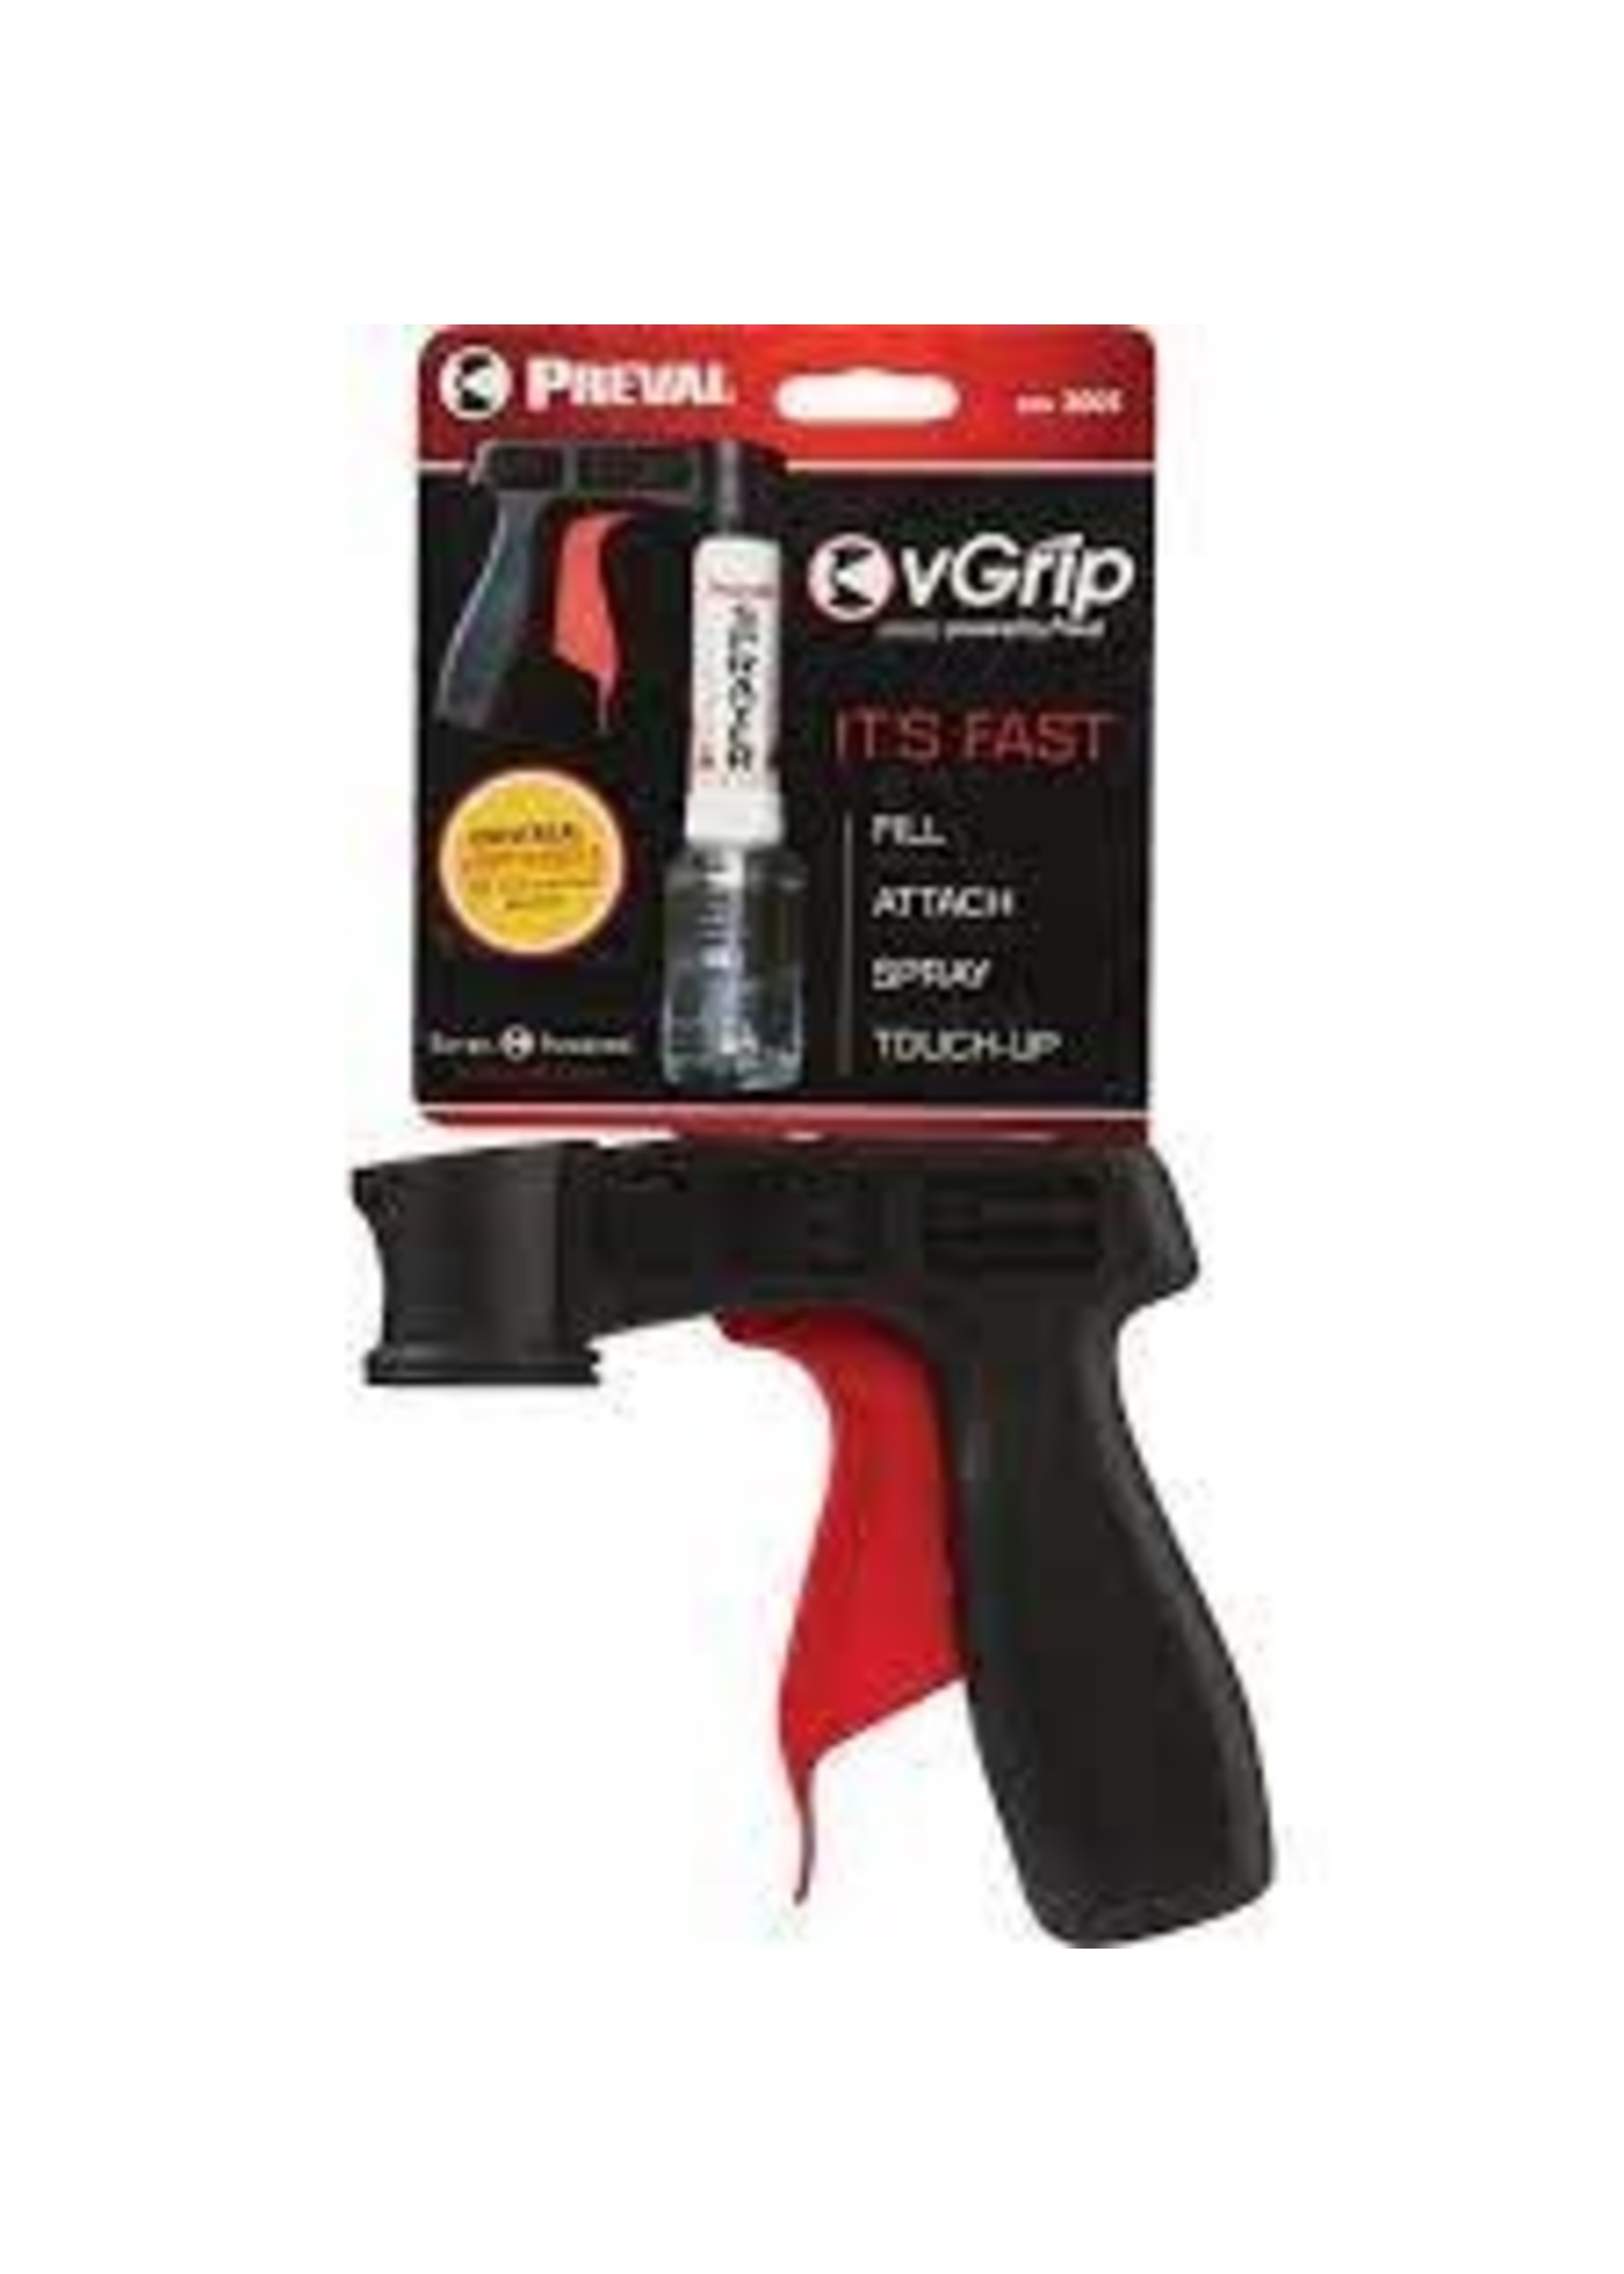 Preval VGrip Handle for Spray Paint